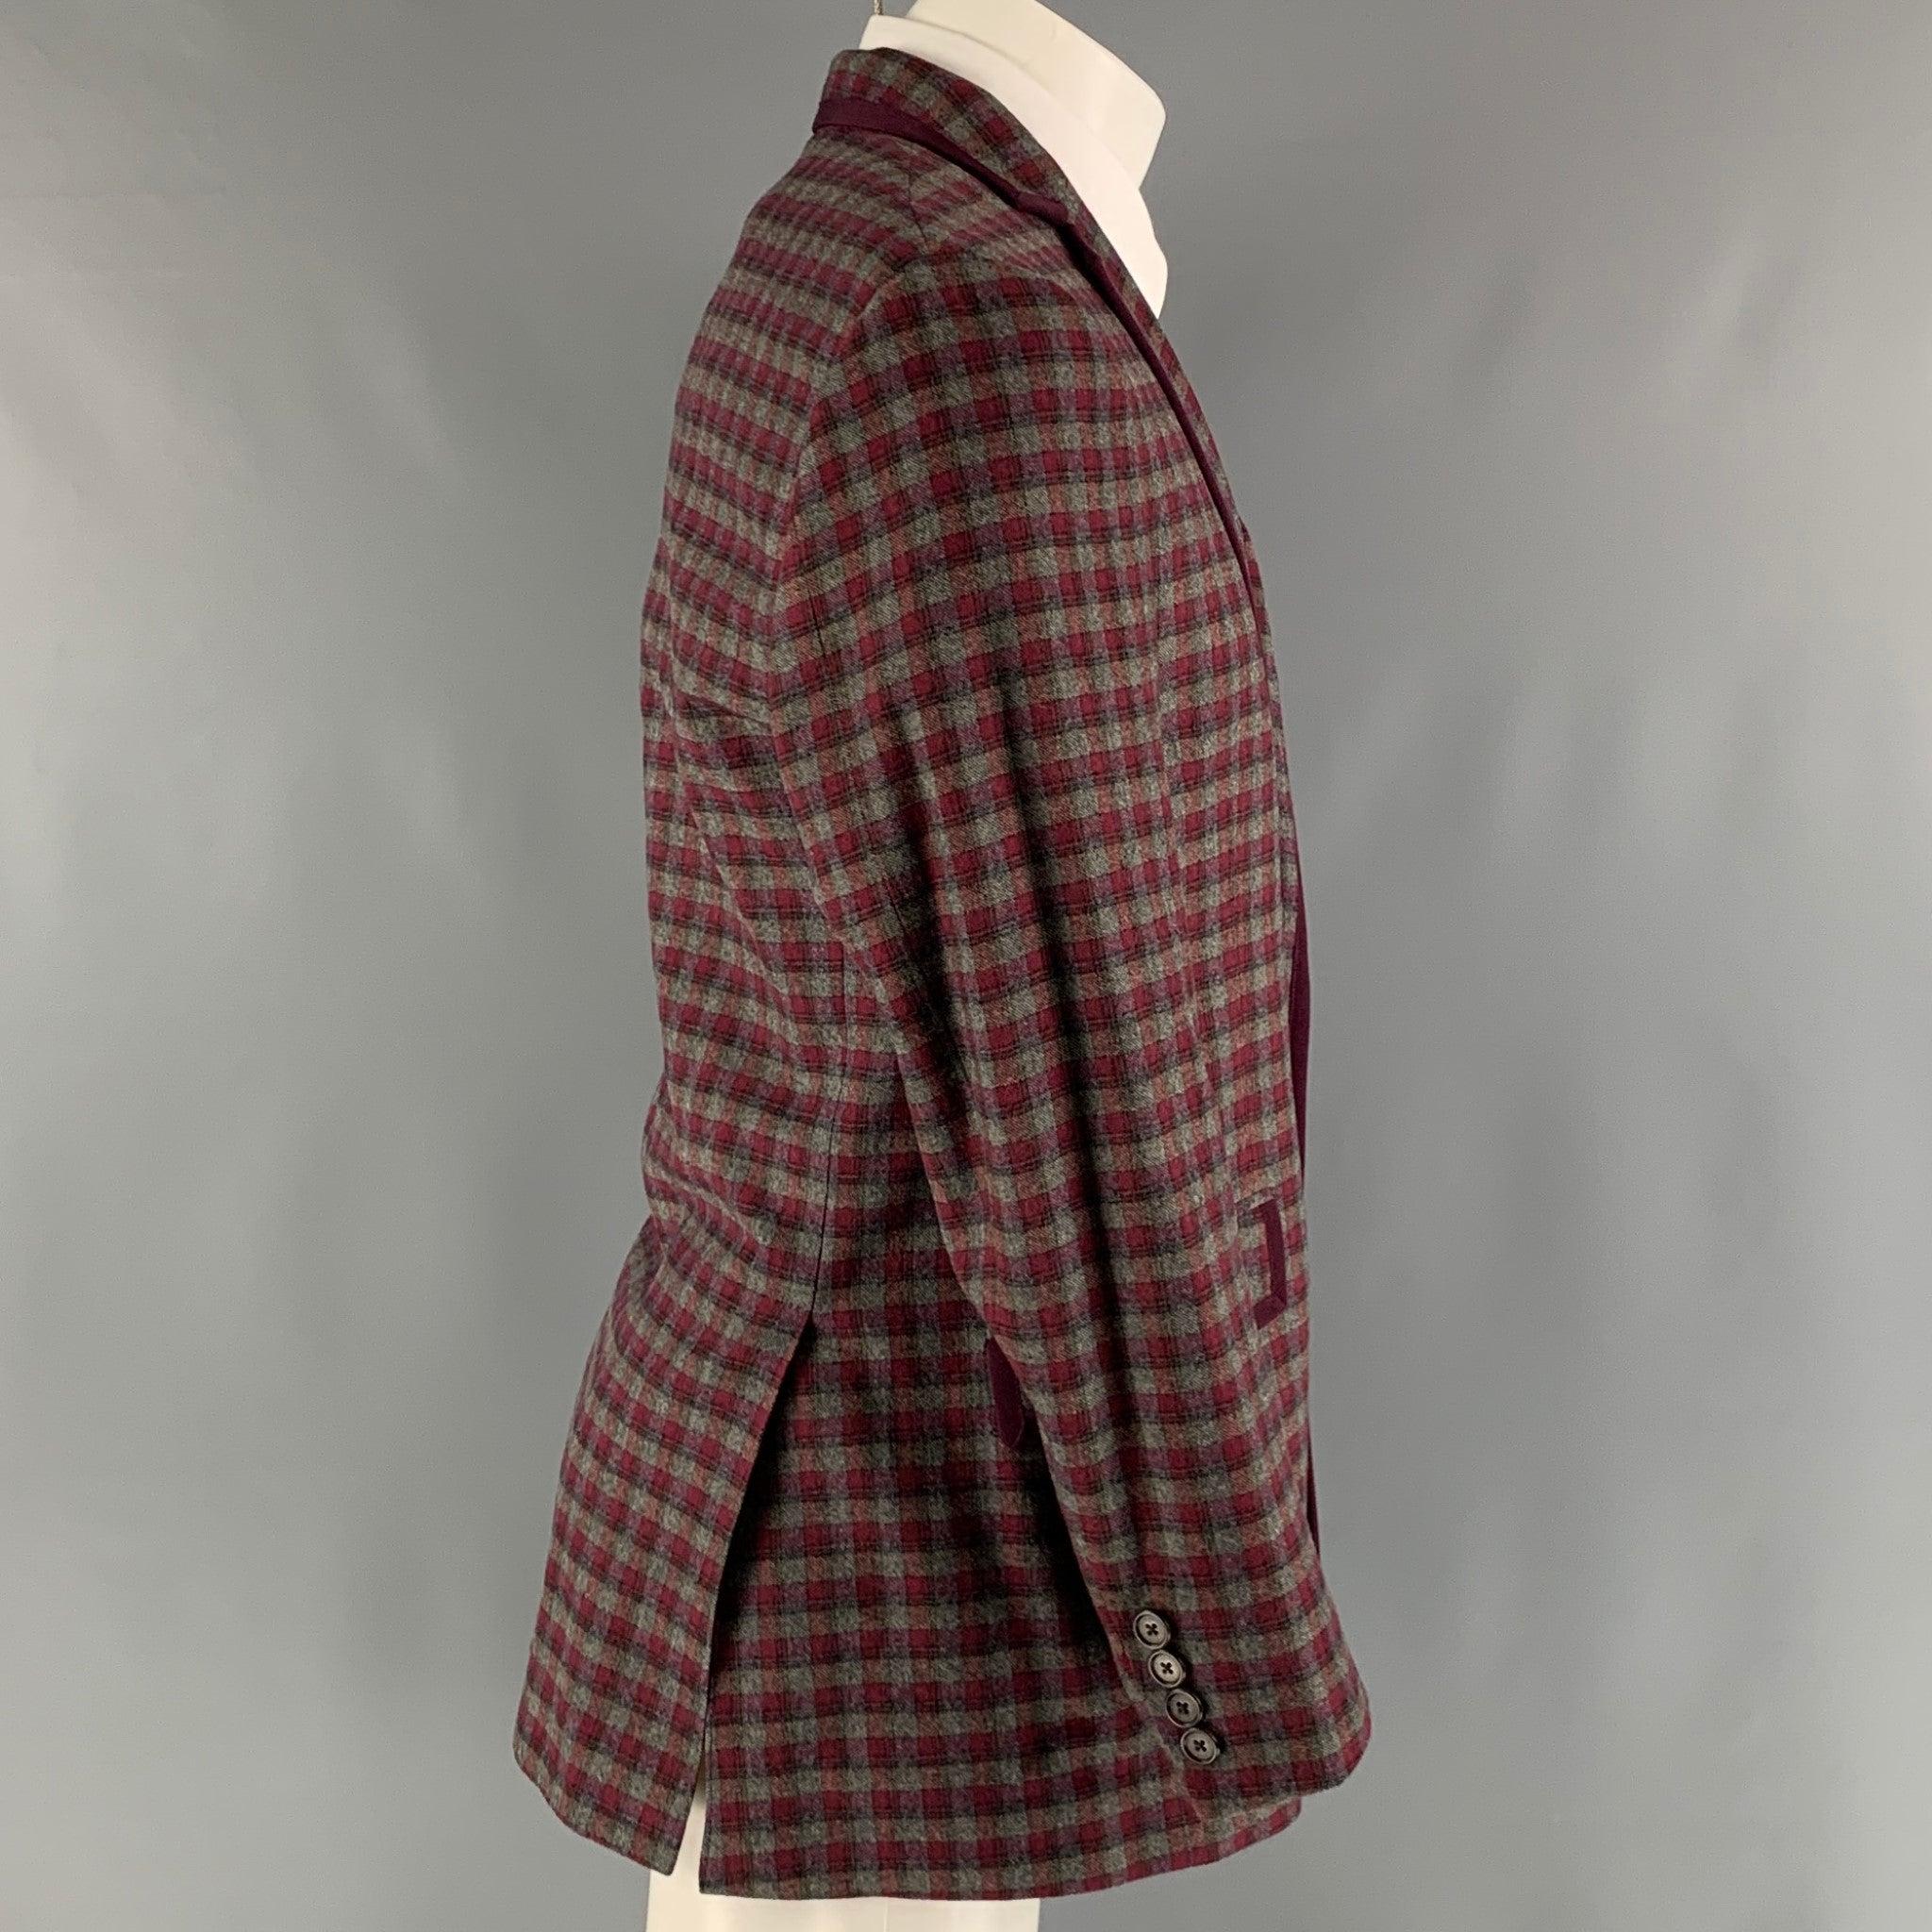 ETRO sport coat comes in a burgundy and grey checkered cotton blend woven material with a full liner featuring a notch lapel, flap pockets, and a two button closure. Made in Italy.Very Good Pre-Owned Condition.
 

Marked:   IT 50 

Measurements: 
